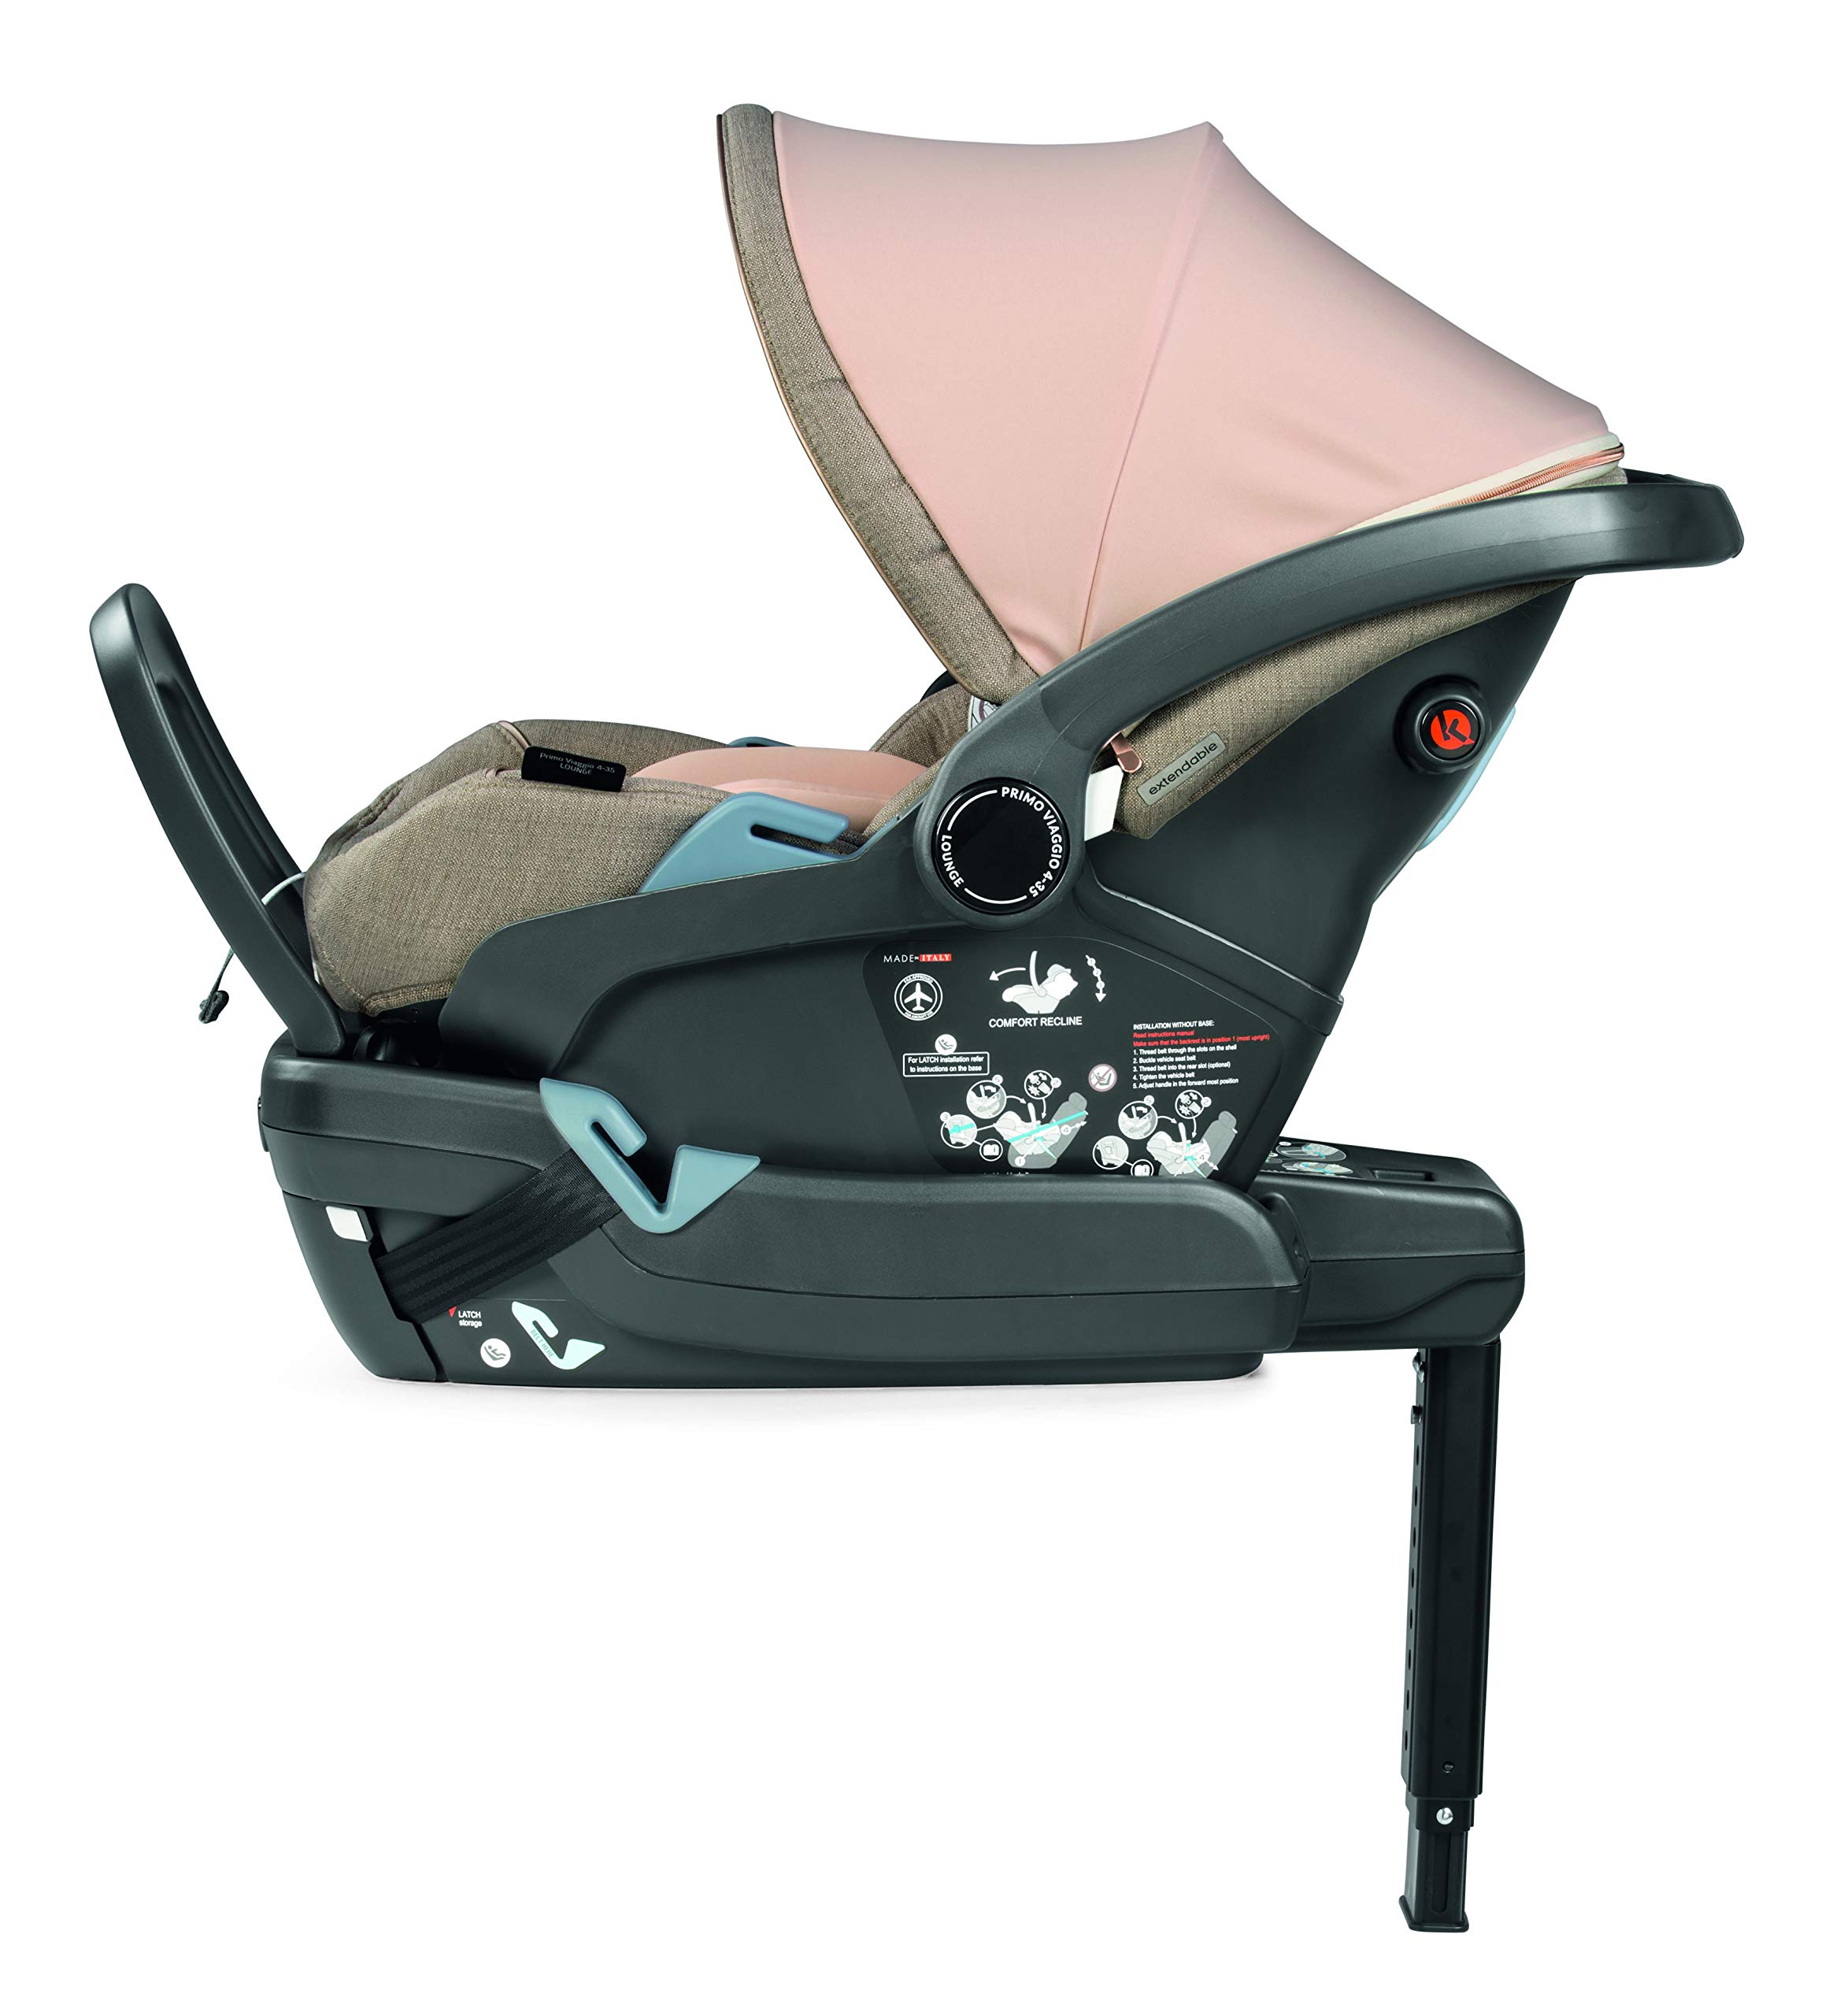 Peg Perego Primo Viaggio 4-35 Lounge - Reclining Rear Facing Infant Car Seat - Includes Base with Load Leg & Anti-Rebound Bar - for Babies 4 to 35 lbs - Made in Italy - Mon Amour (Pink & Beige)